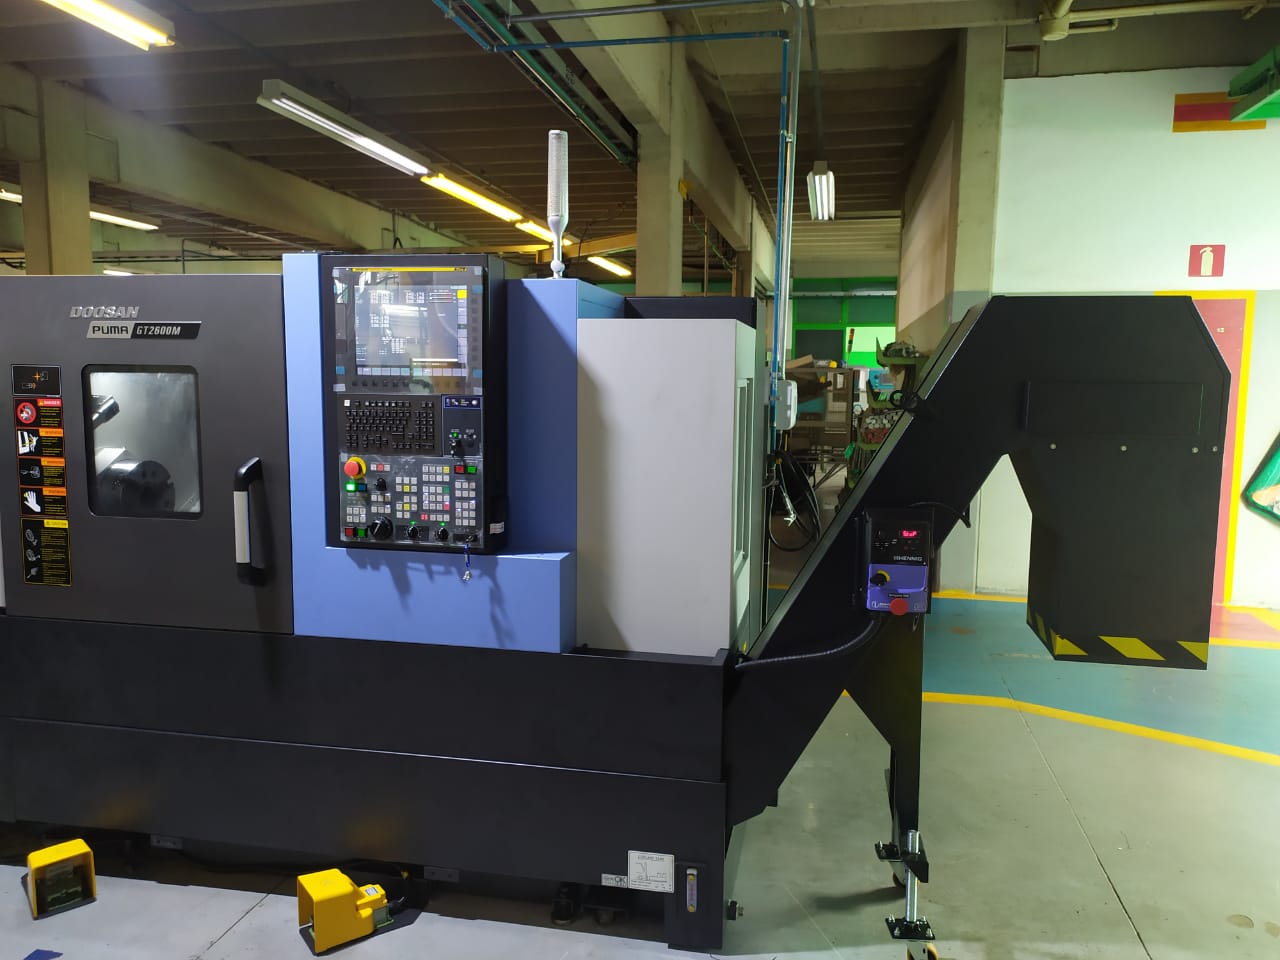 Complex CNC machine debris removal solved with the integration of VFD technology